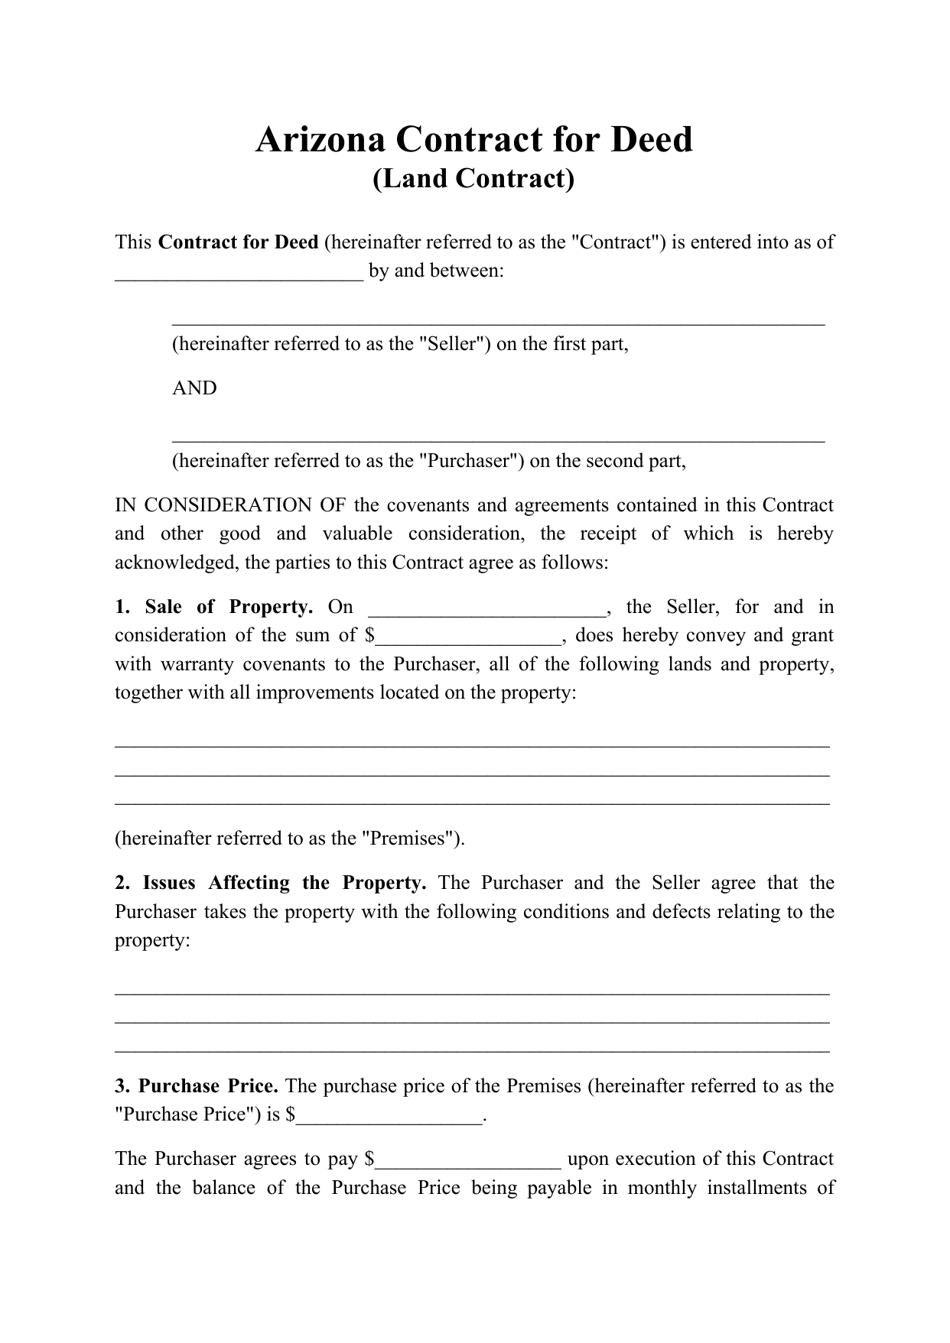 Contract for Deed (Land Contract) - Arizona, Page 1